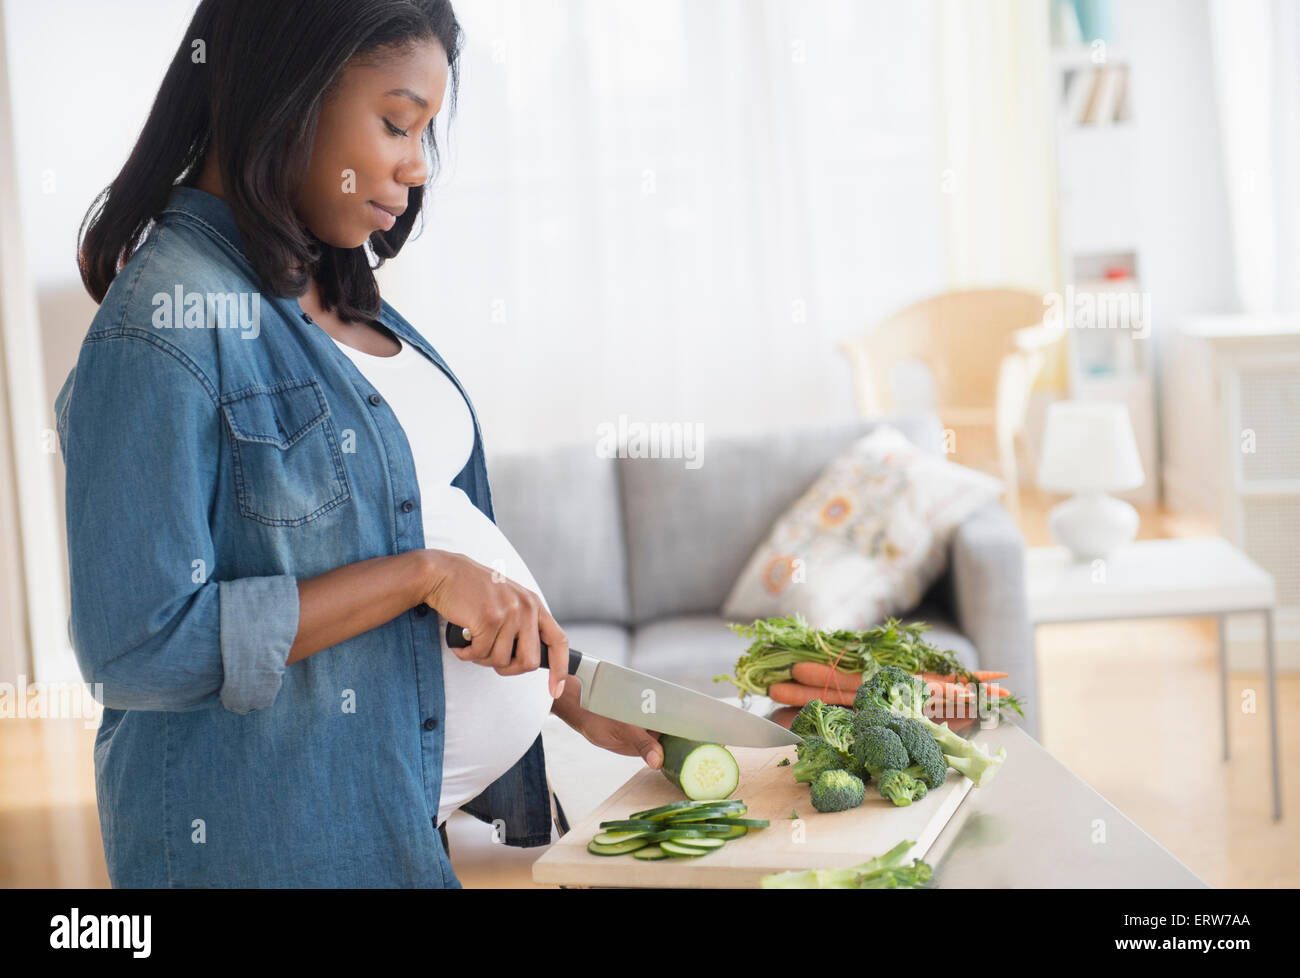 Black pregnant woman chopping vegetables in kitchen Stock Photo